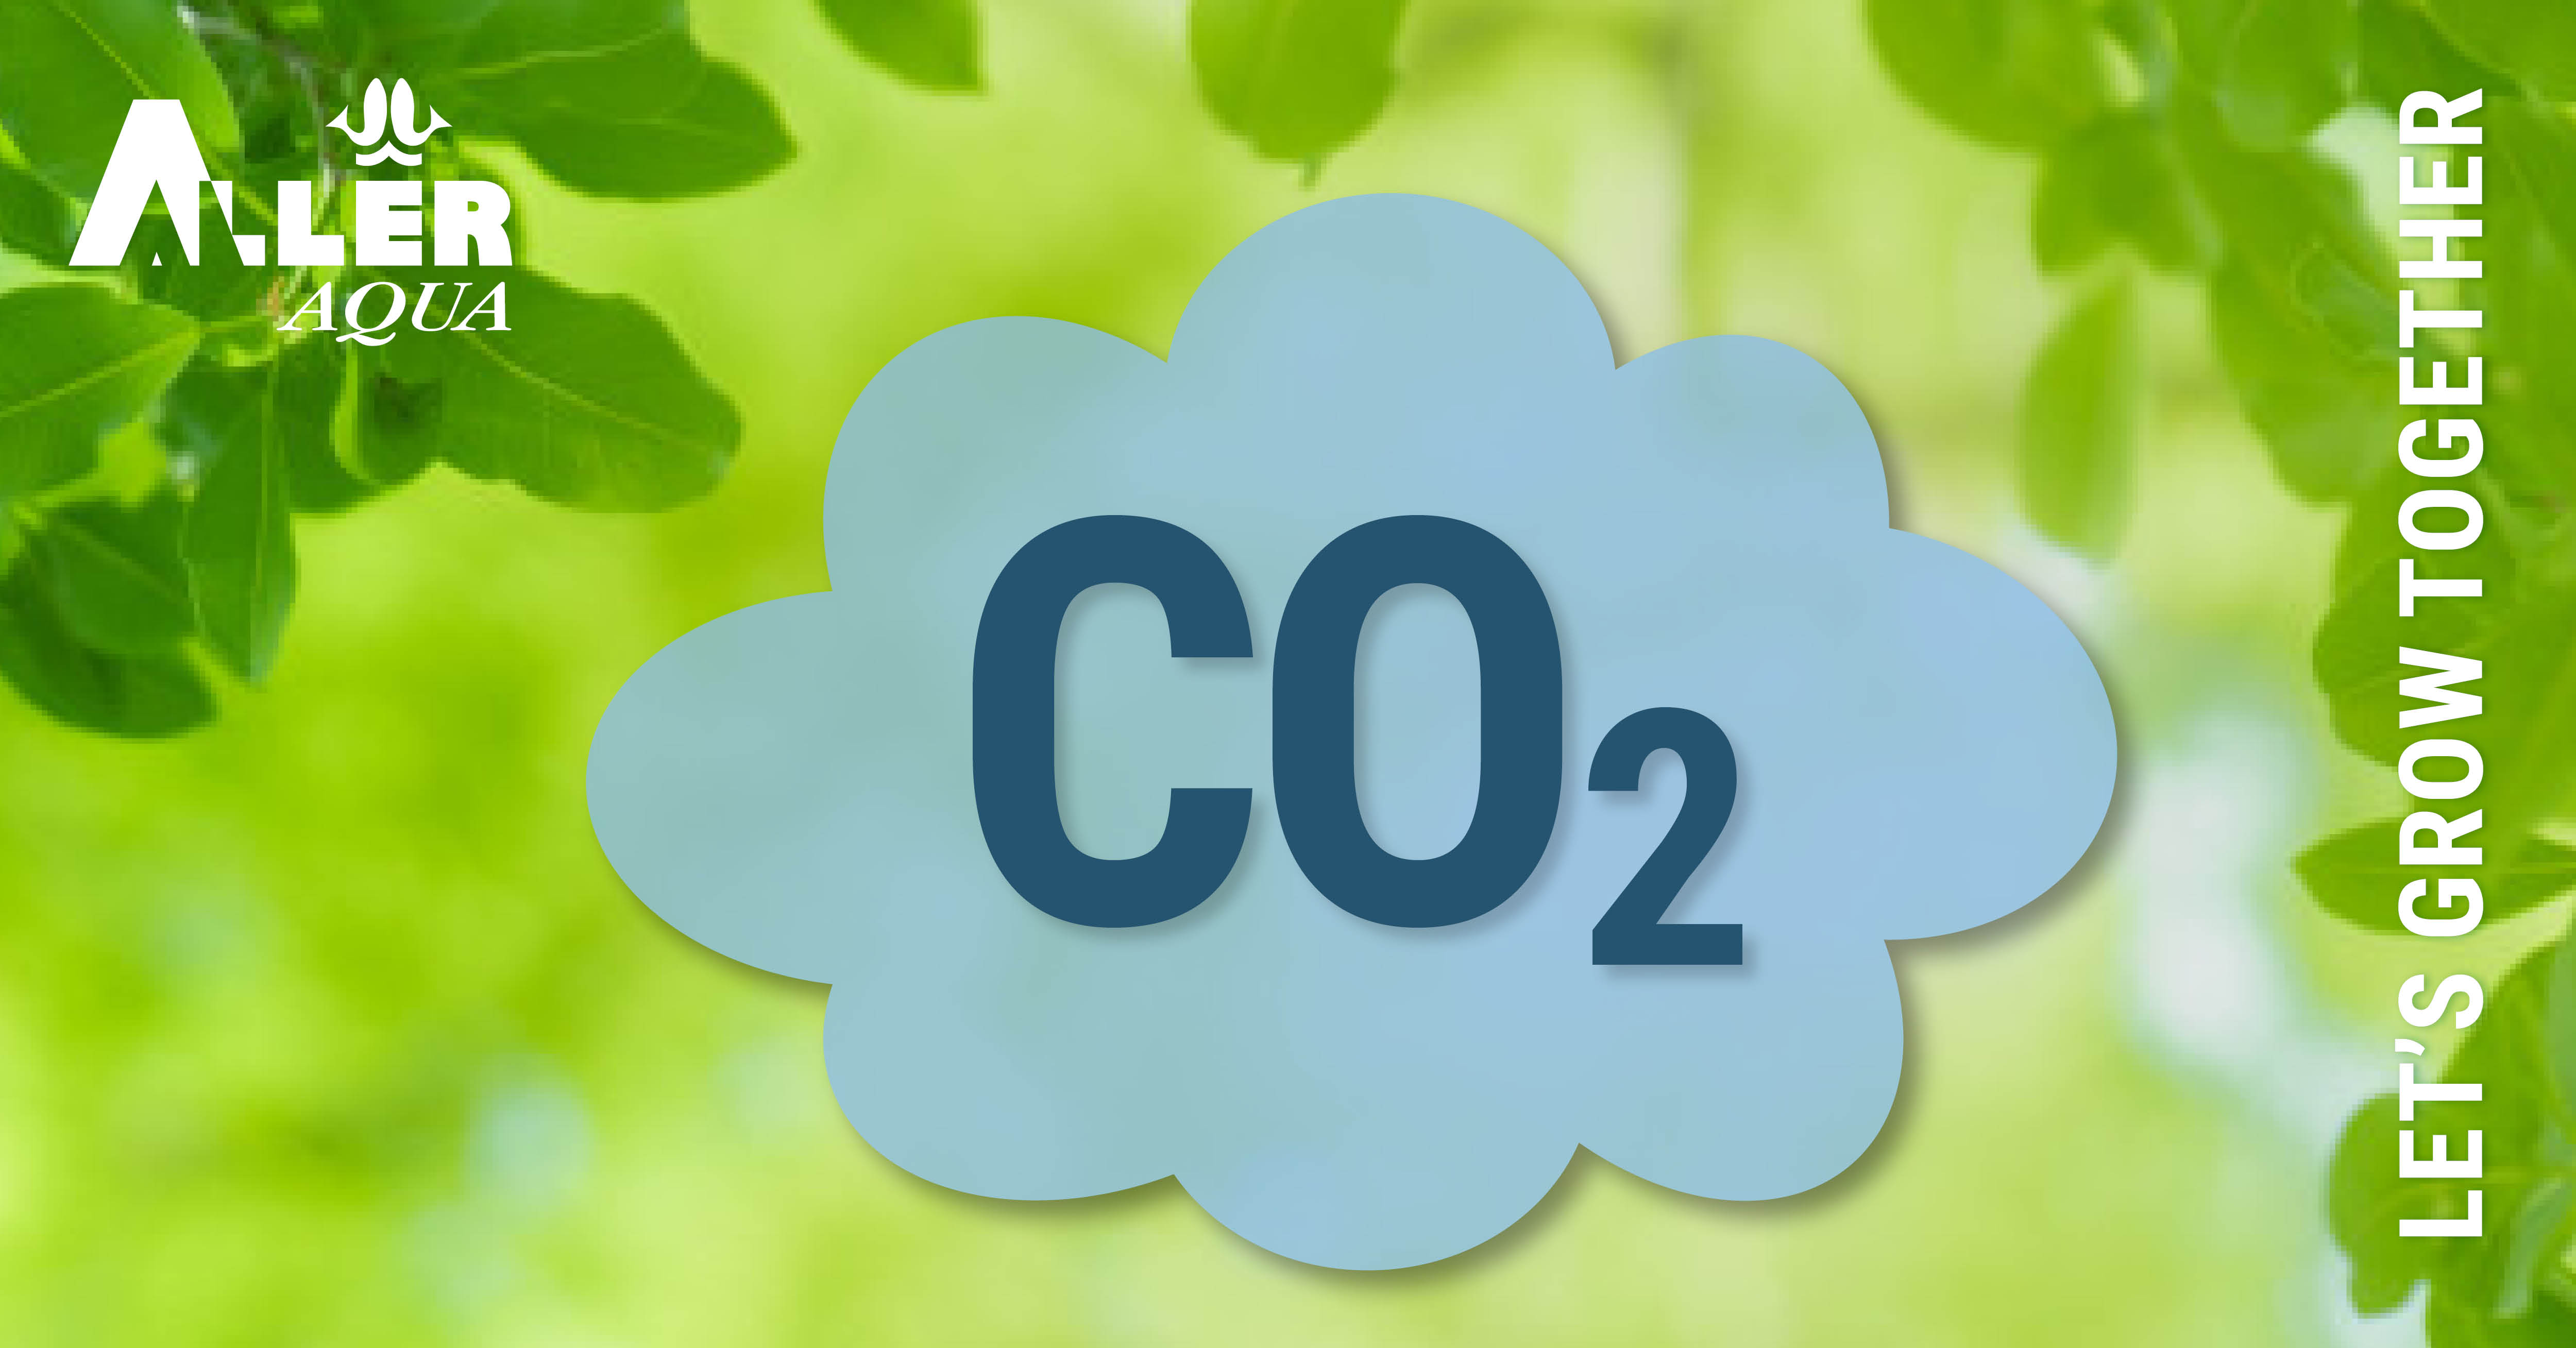 Aller Aqua can now declare CO2 equivalents on feeds